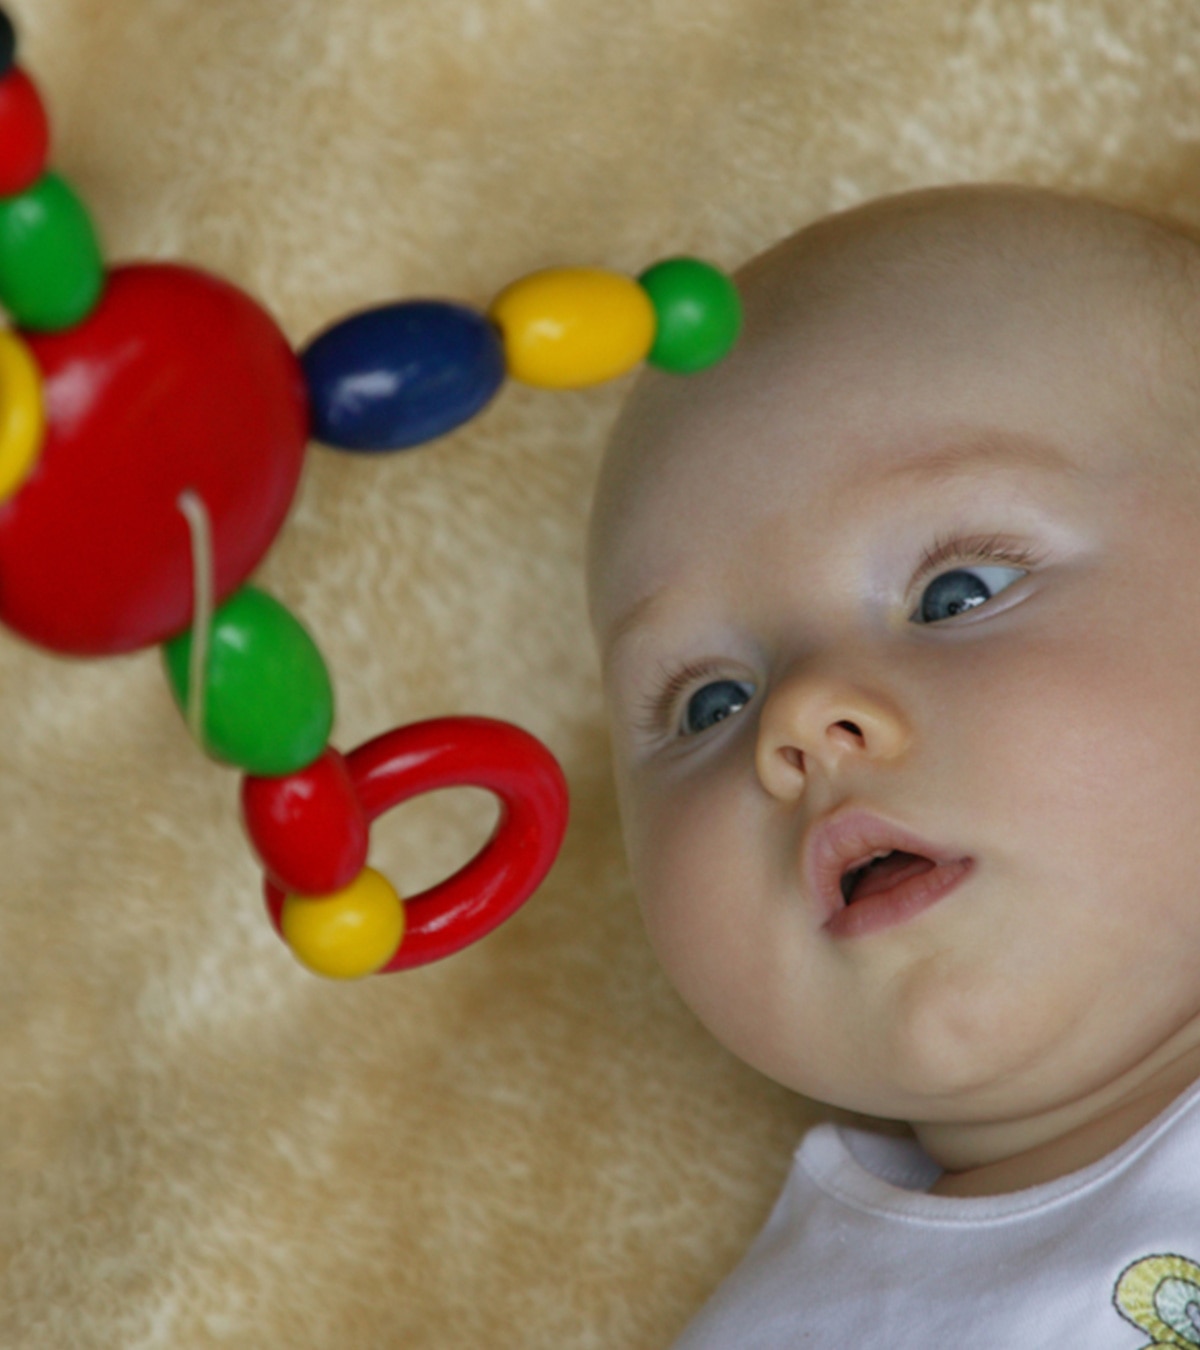 When Do Babies See Color And Other Vision Milestones